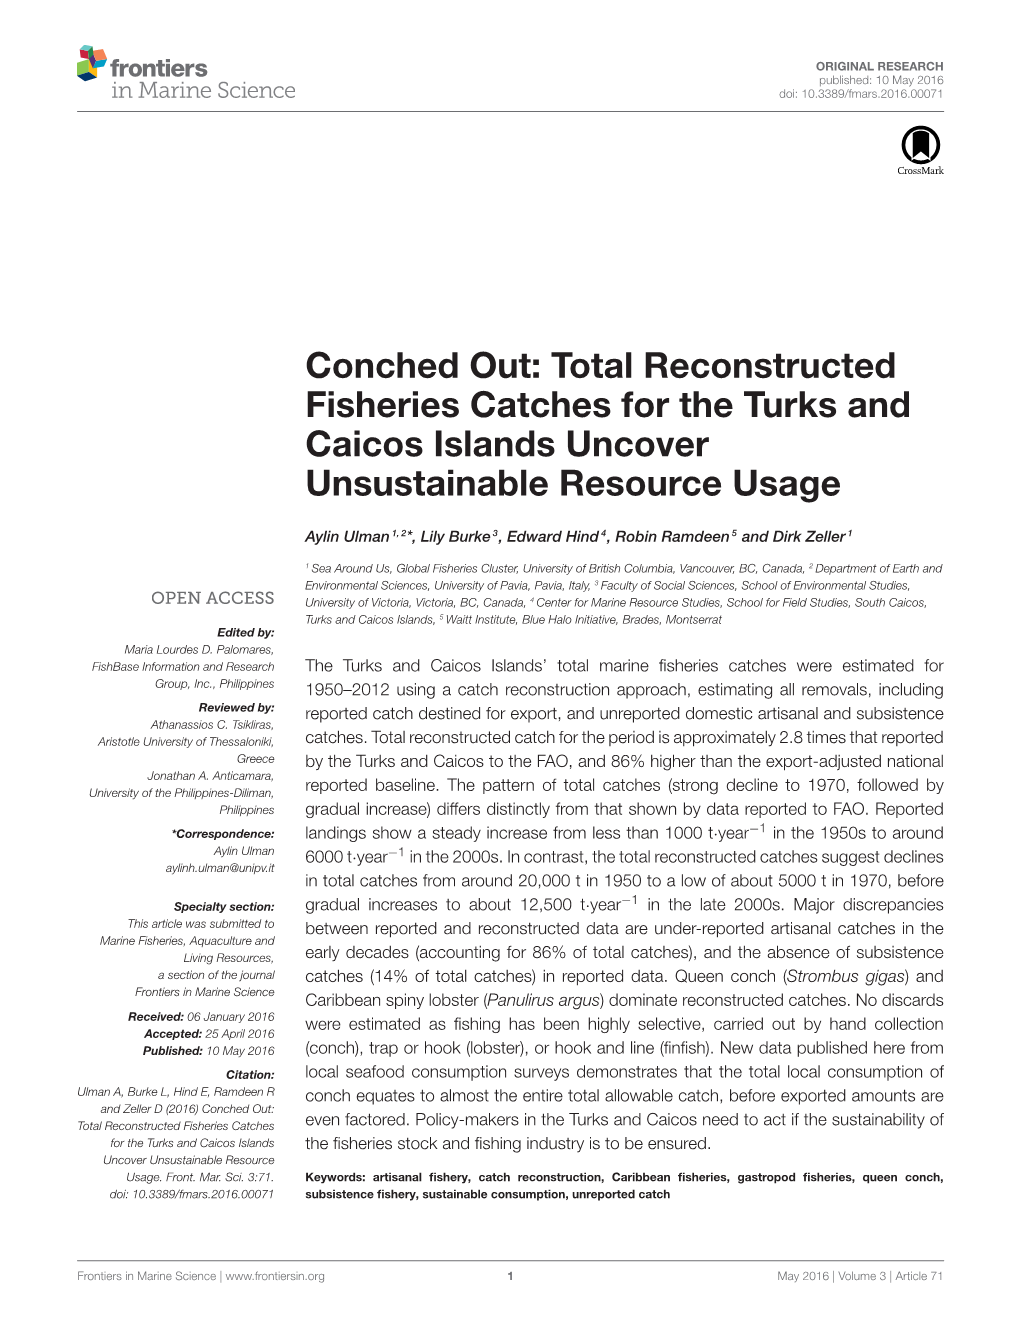 Conched Out: Total Reconstructed Fisheries Catches for the Turks and Caicos Islands Uncover Unsustainable Resource Usage